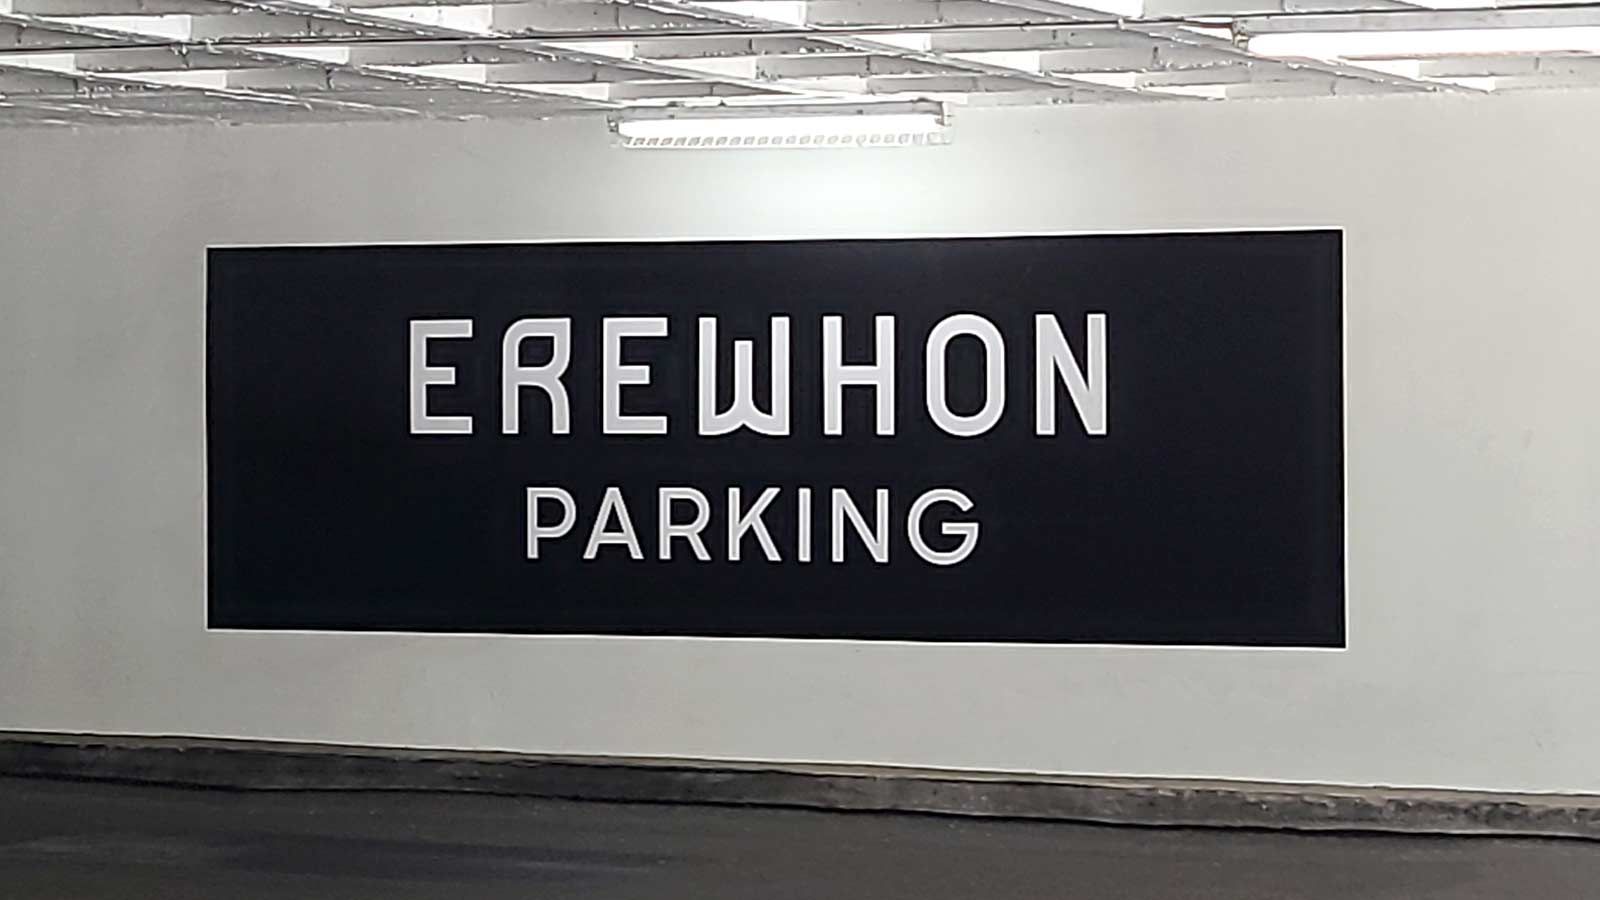 Erewhon wall decal installed in the parking lot